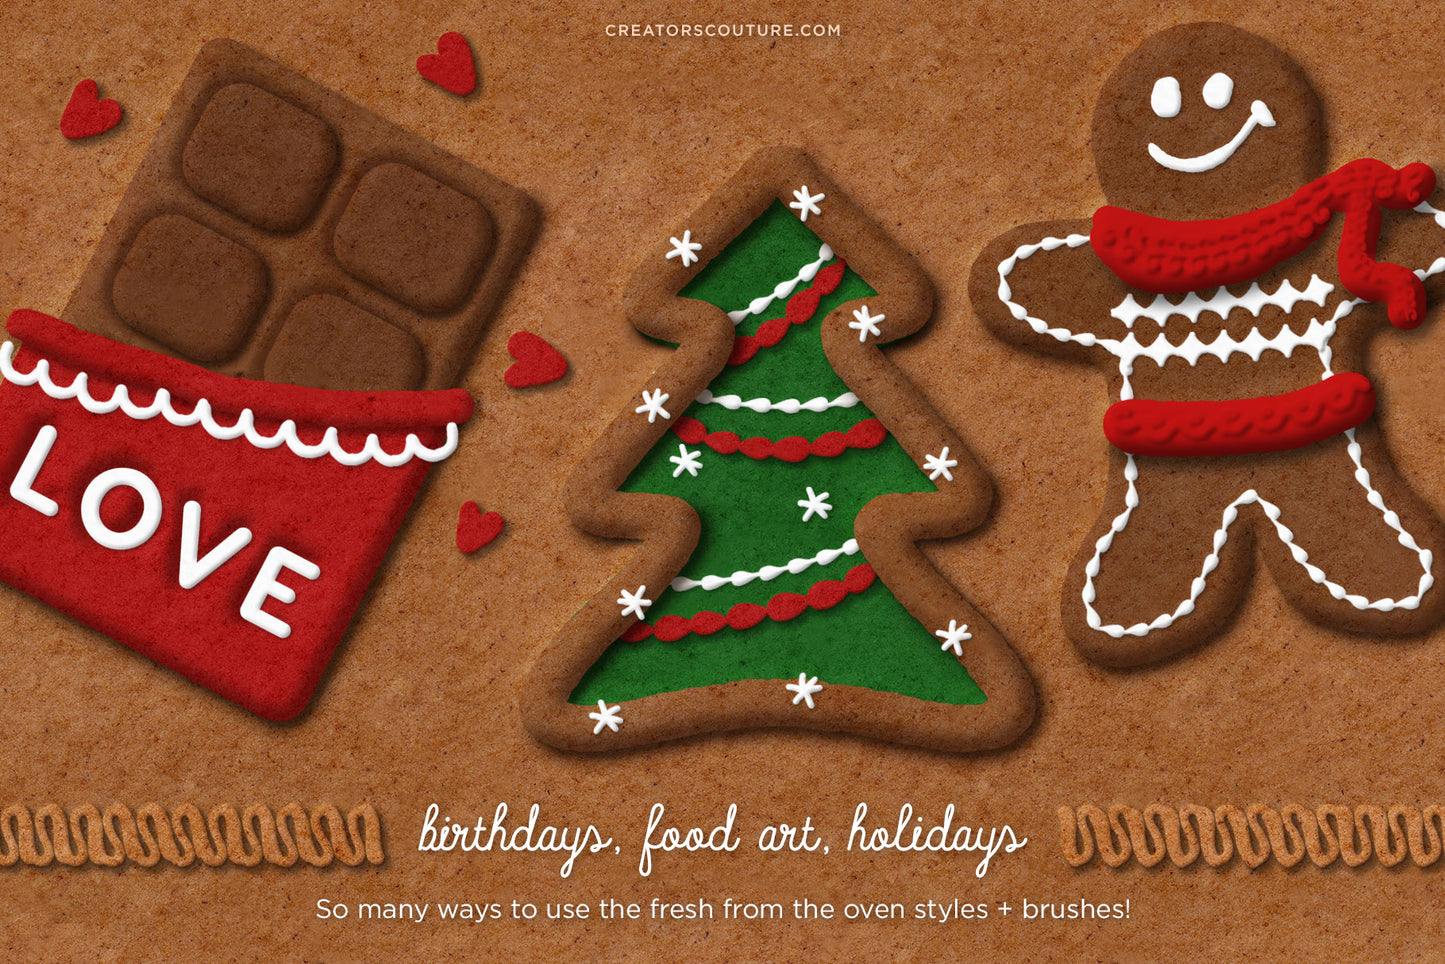 Gingerbread, Cookie, & Cake Graphic & Lettering Effects for Photoshop, birthday and holiday designs, chocolate, christmas tree and gingerbread man